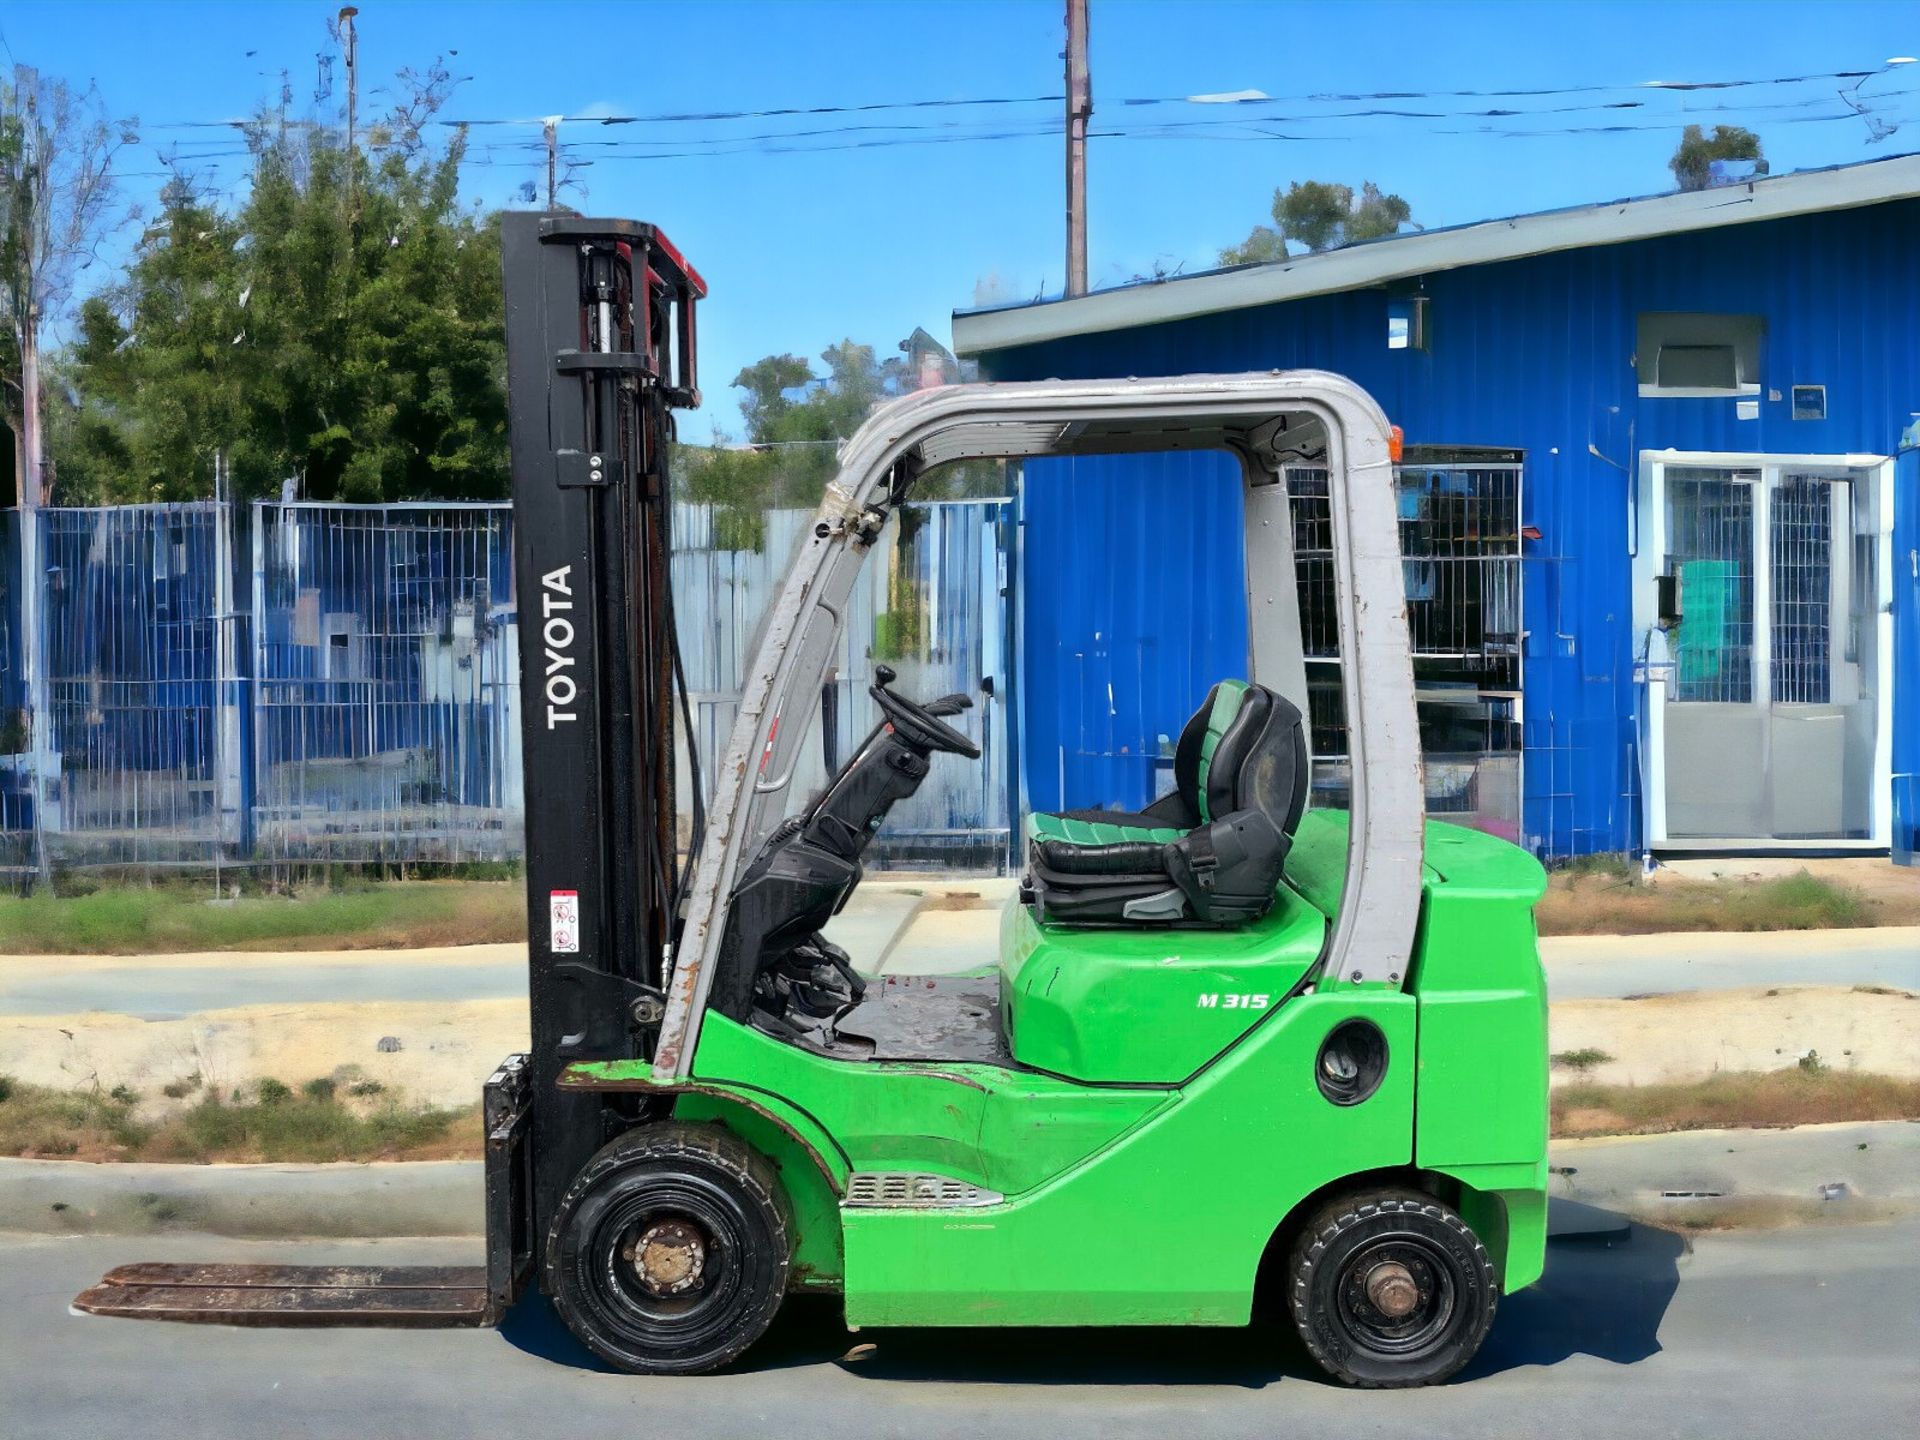 2017 CESAB M315D DIESEL FORKLIFT - RELIABLE PERFORMANCE, EXCEPTIONAL VALUE - Image 2 of 8